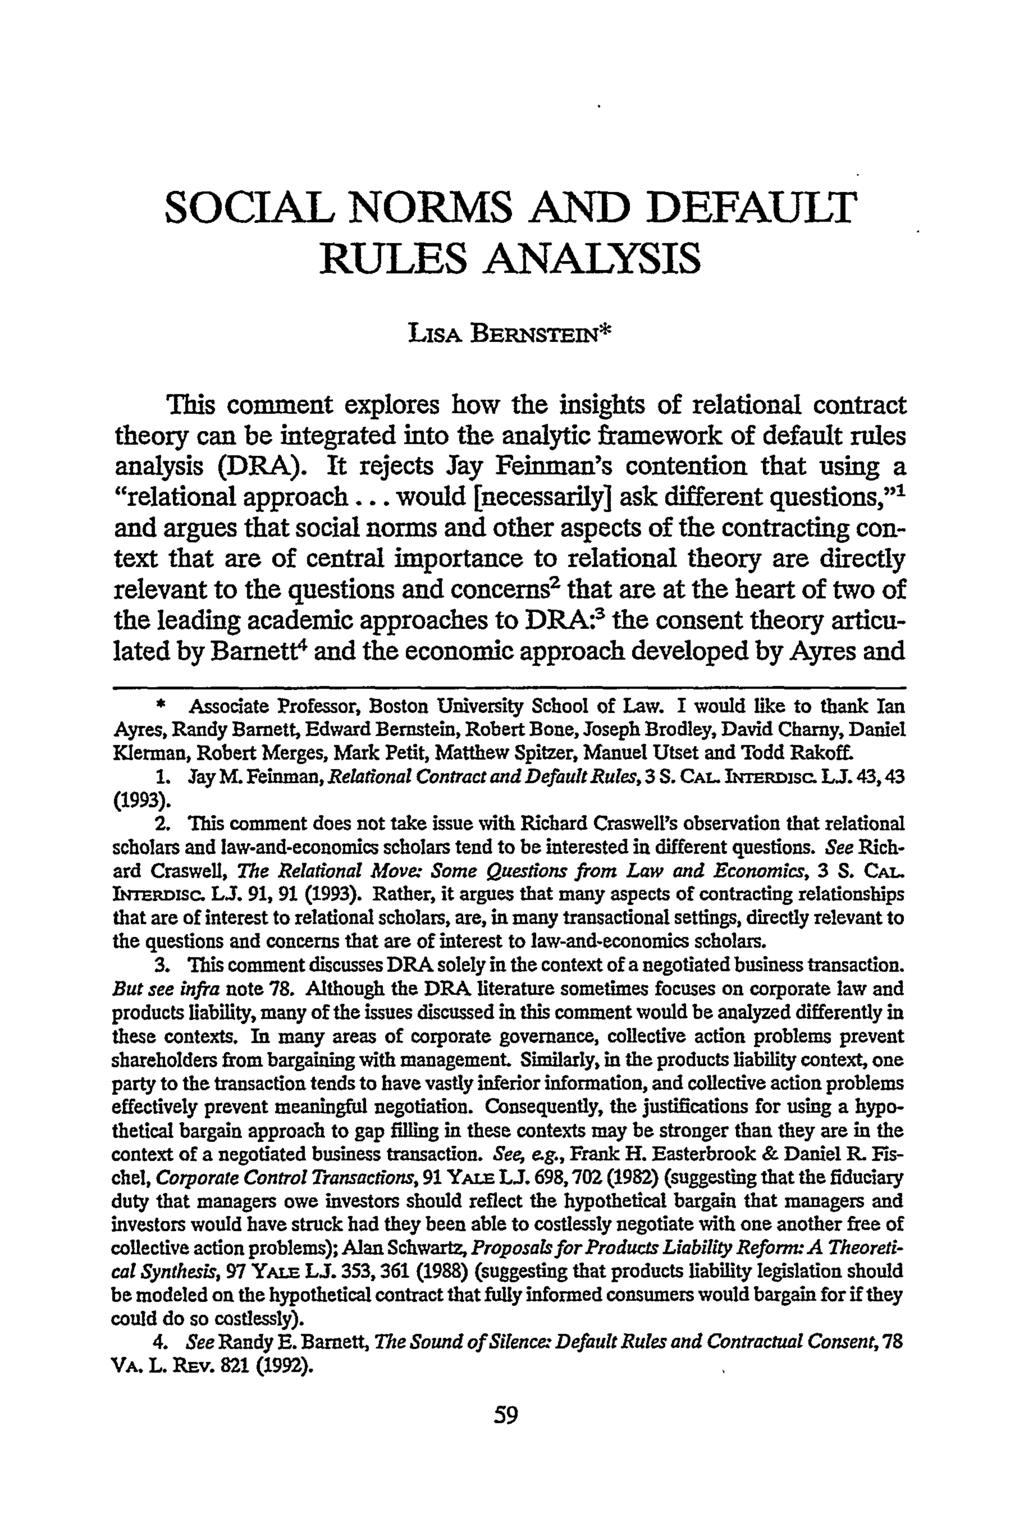 SOCIAL NORMS AND DEFAULT RULES ANALYSIS LISA BERNSTEIN* This comment explores how the insights of relational contract theory can be integrated into the analytic framework of default rules analysis